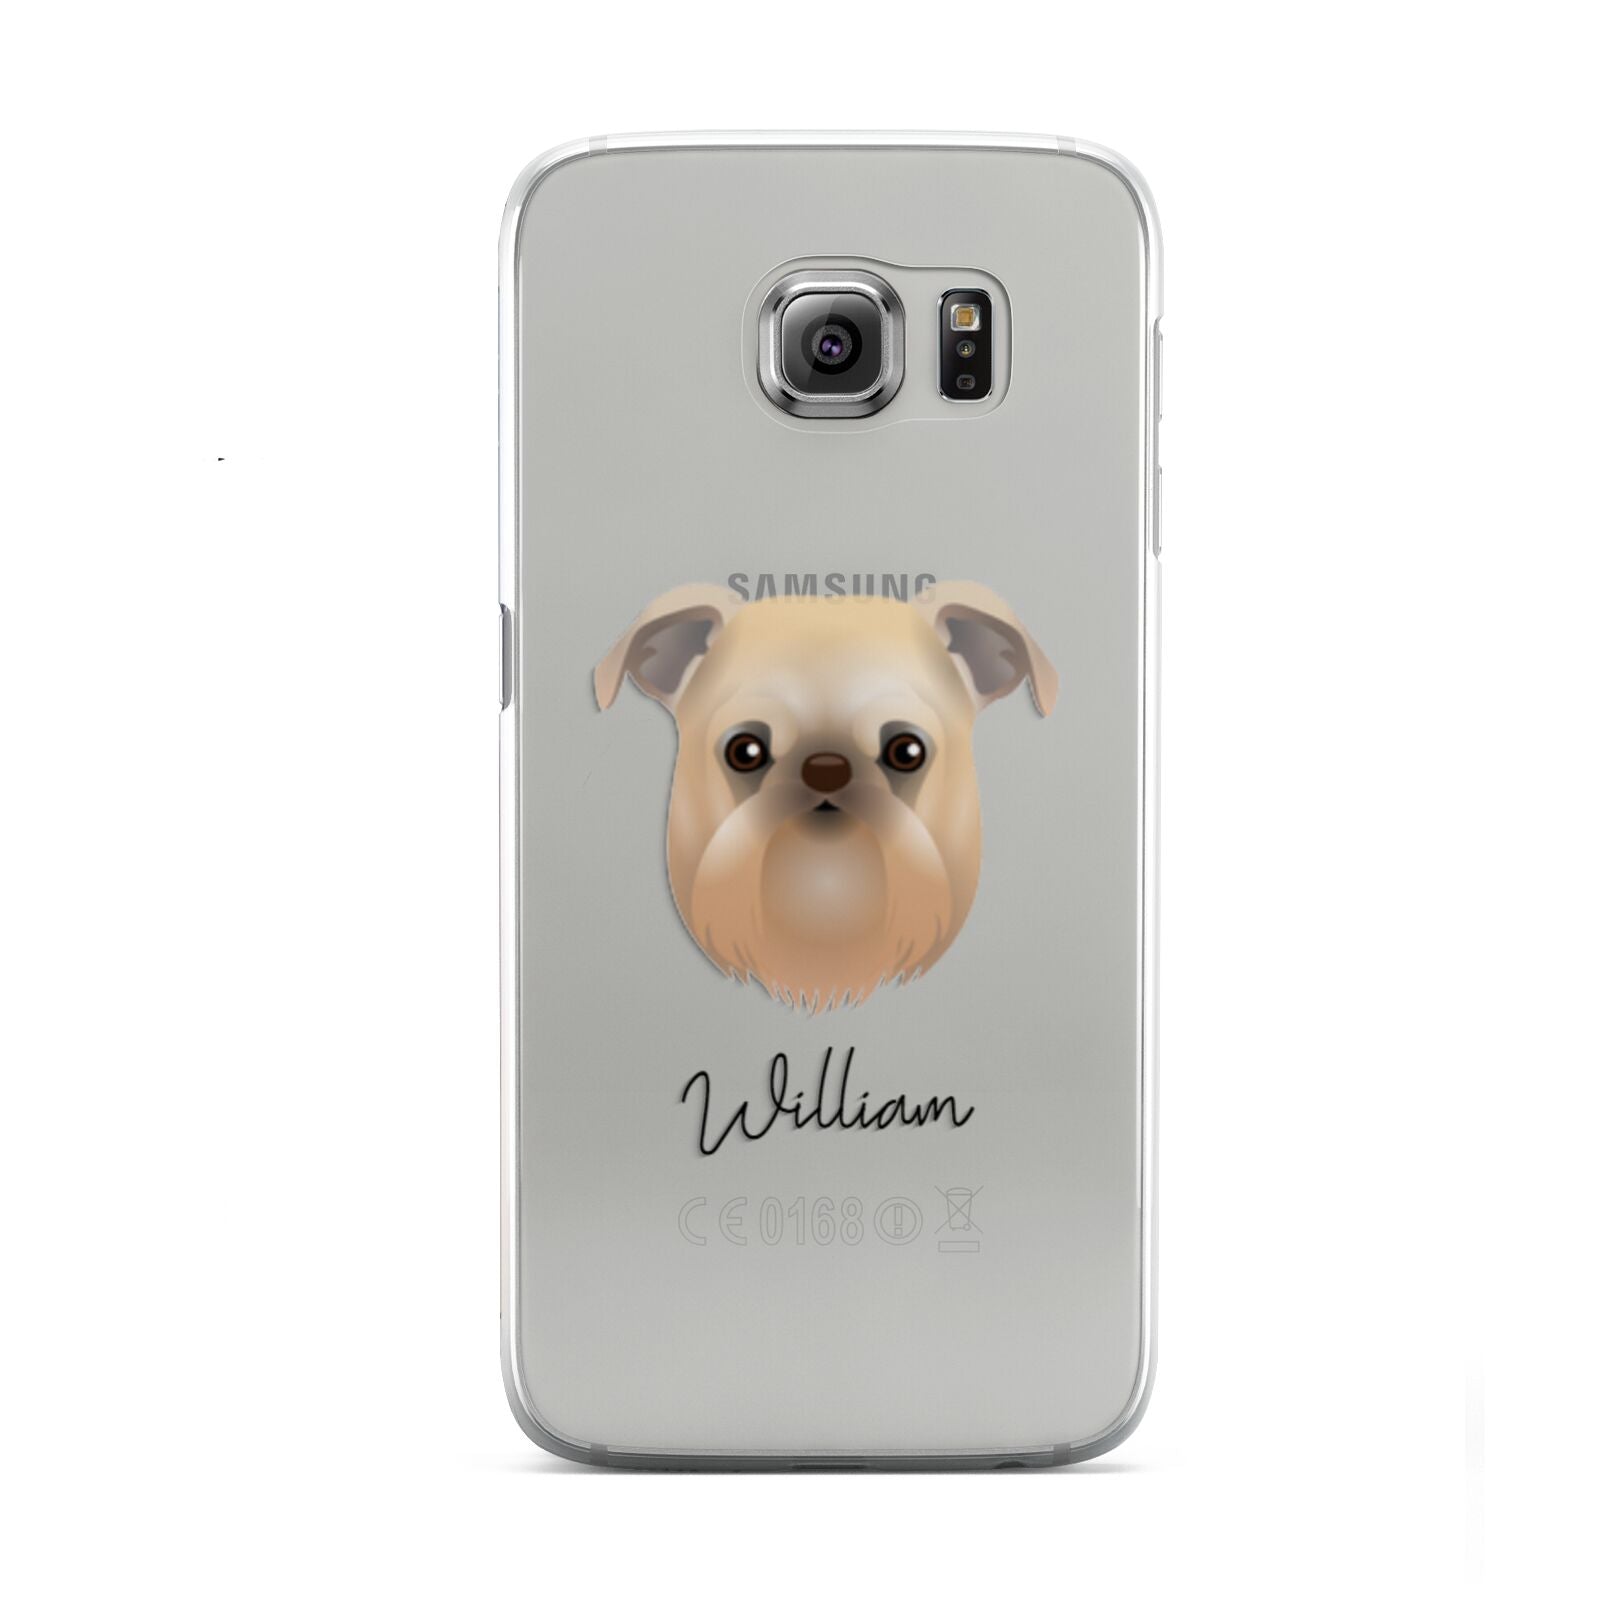 Griffon Bruxellois Personalised Samsung Galaxy S6 Case